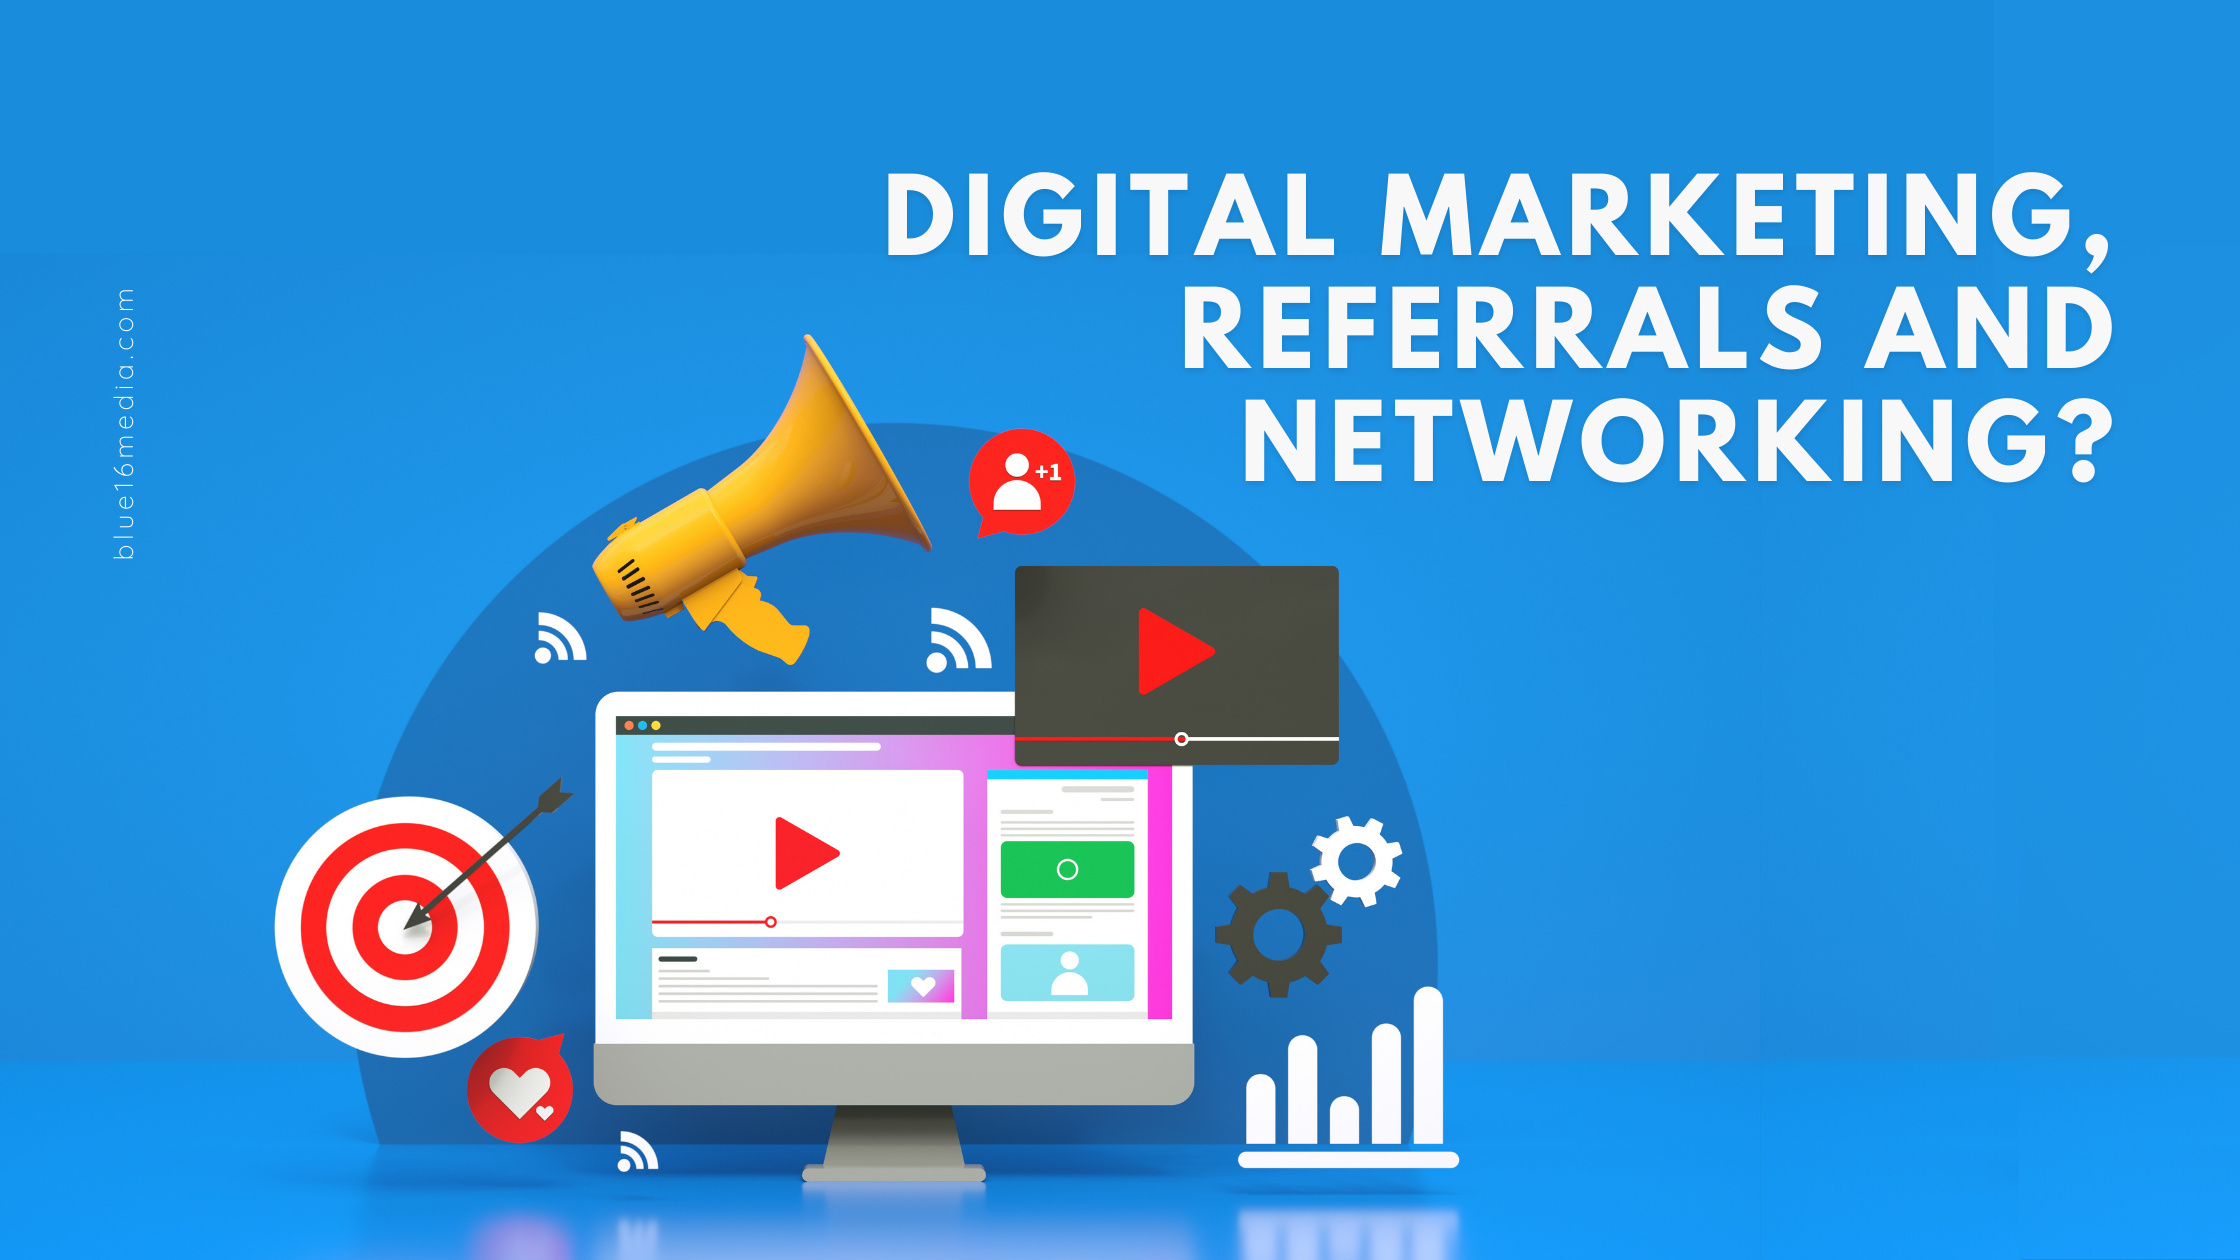 How can your digital marketing strategy help drive more organic referrals and networking?